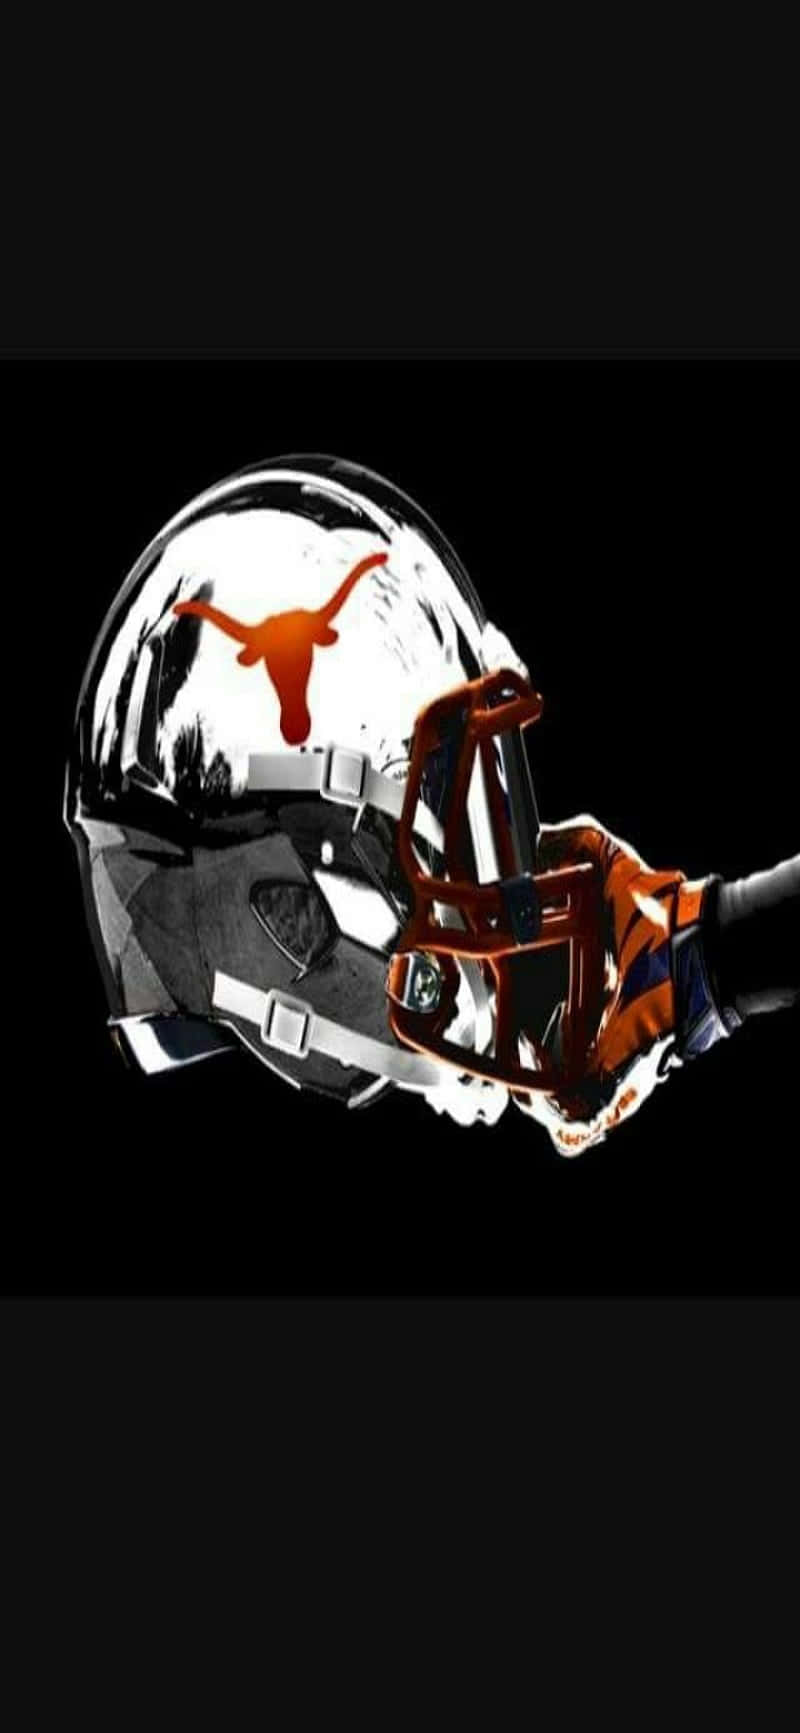 "Show Your Support for Texas Football" Wallpaper